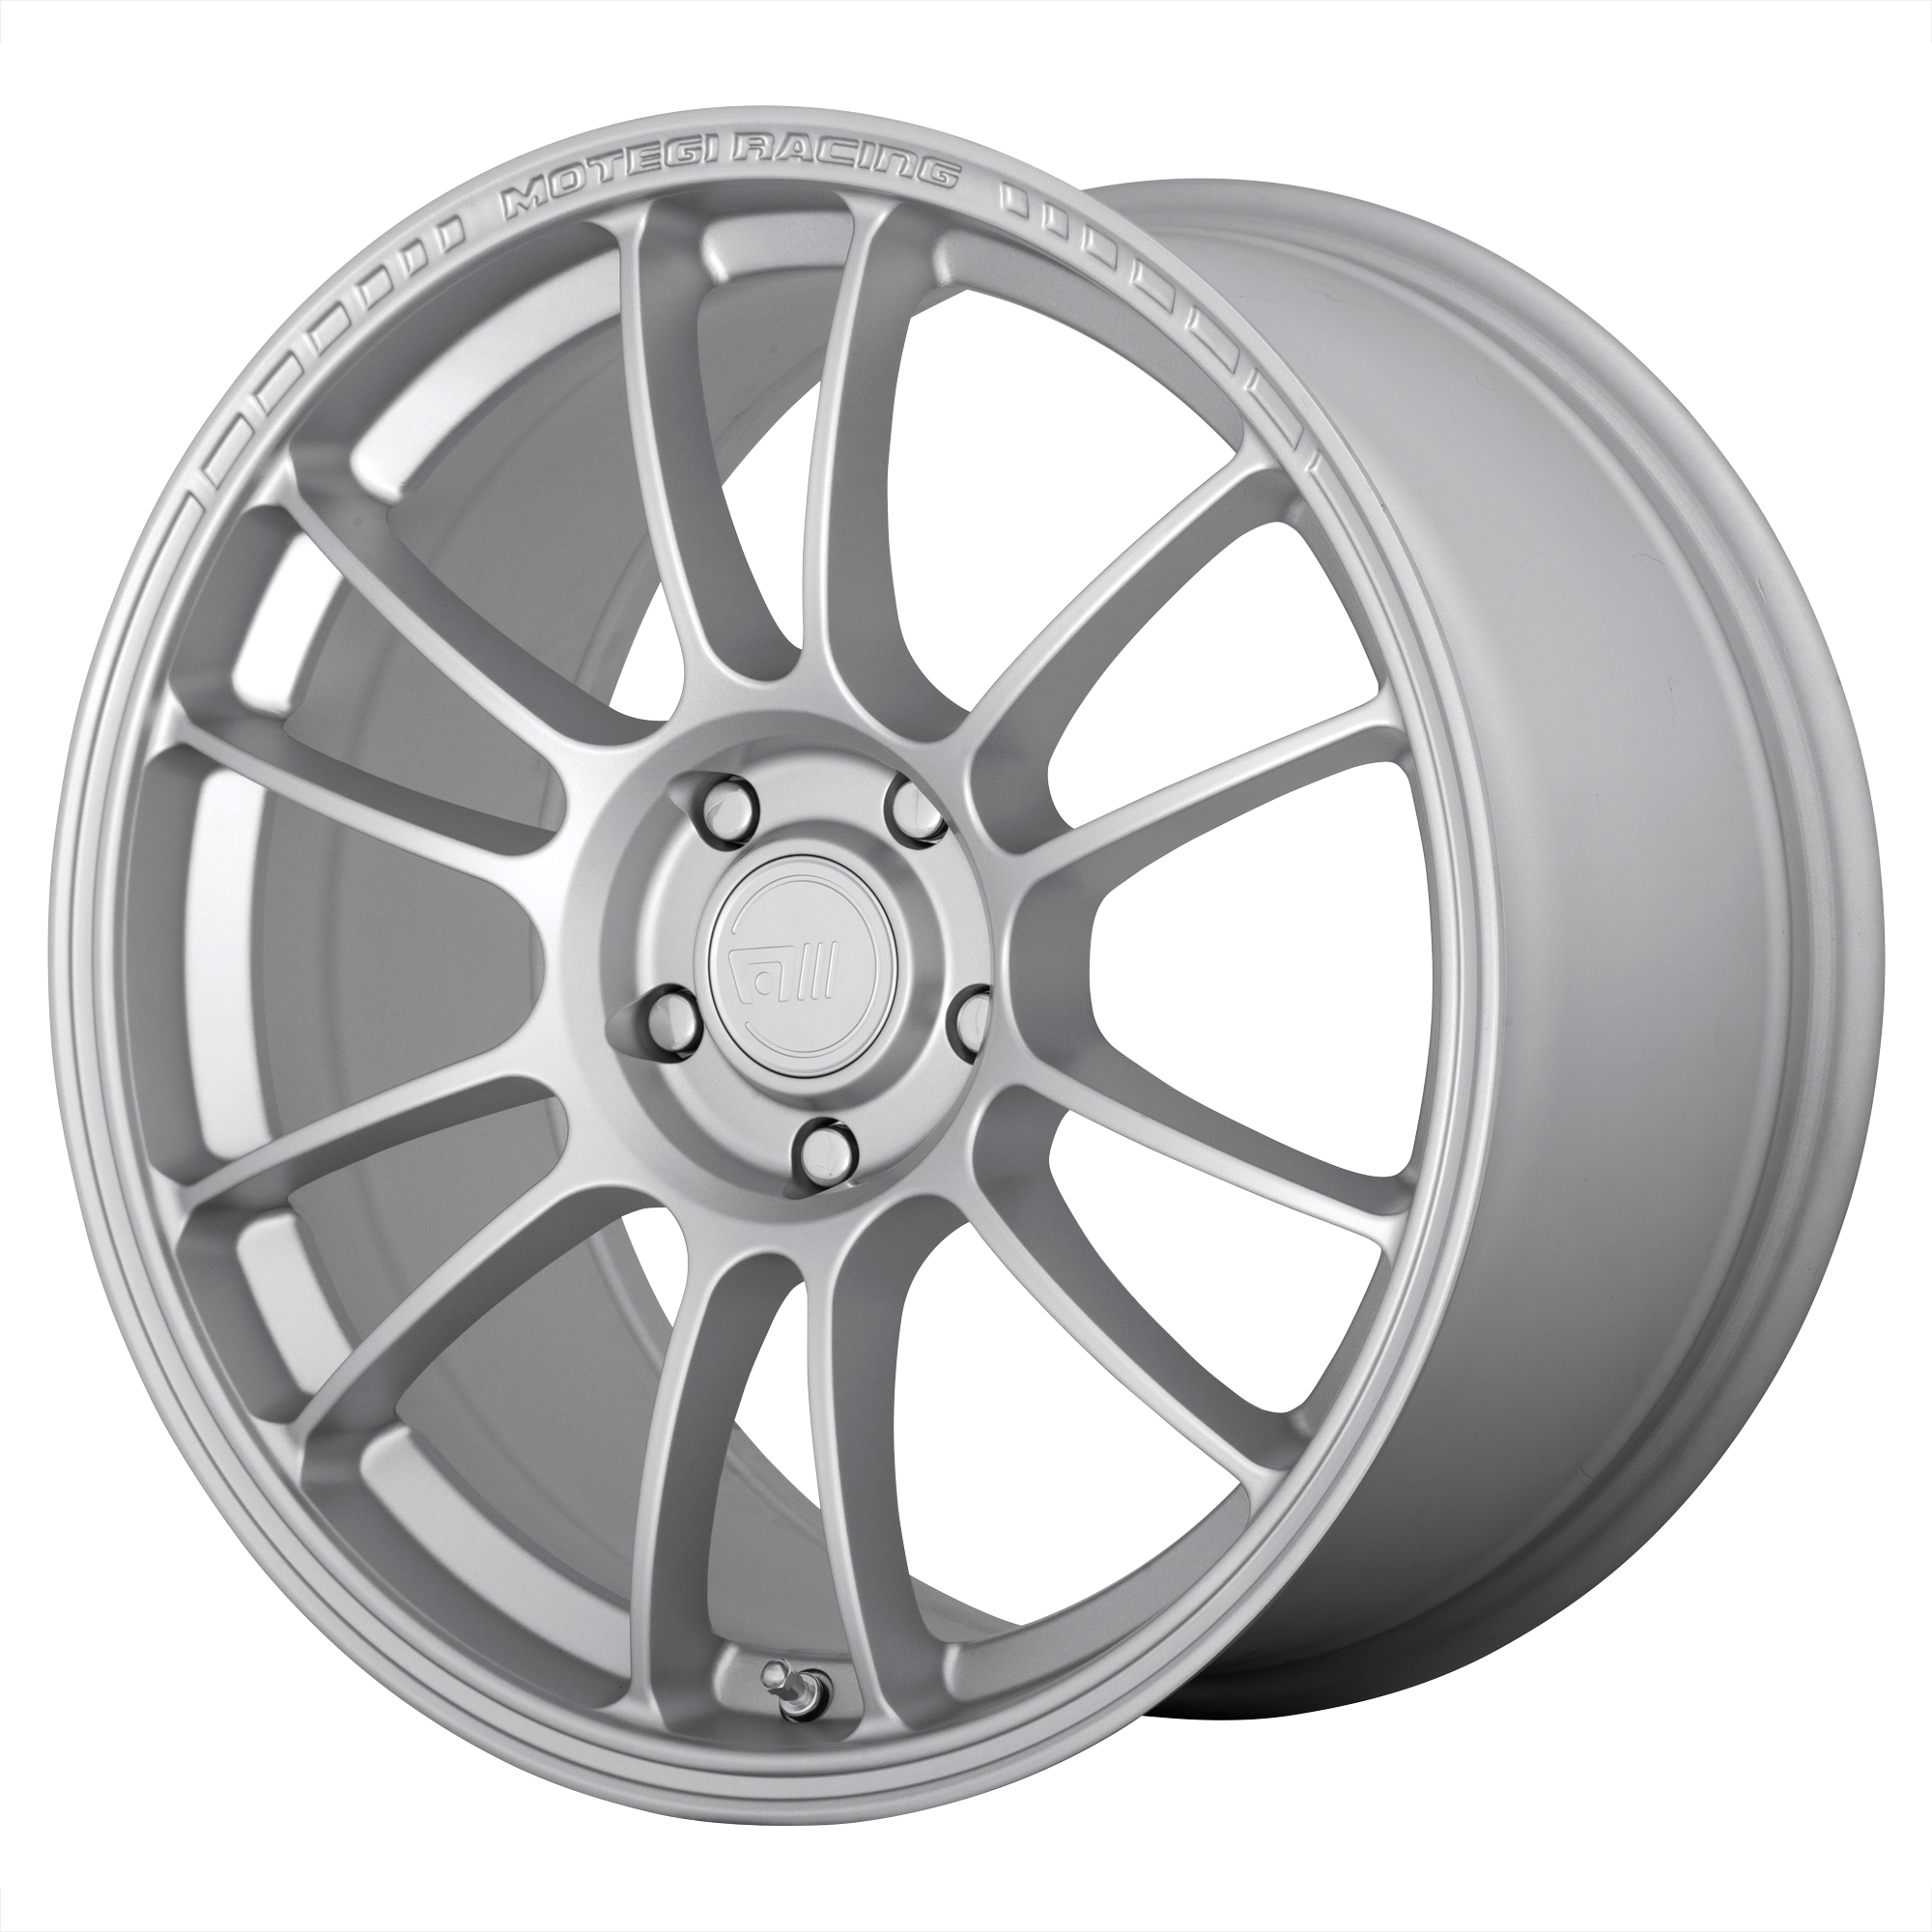 SS6 18x9.5 5x120.00 HYPER SILVER (45 mm) - Tires and Engine Performance